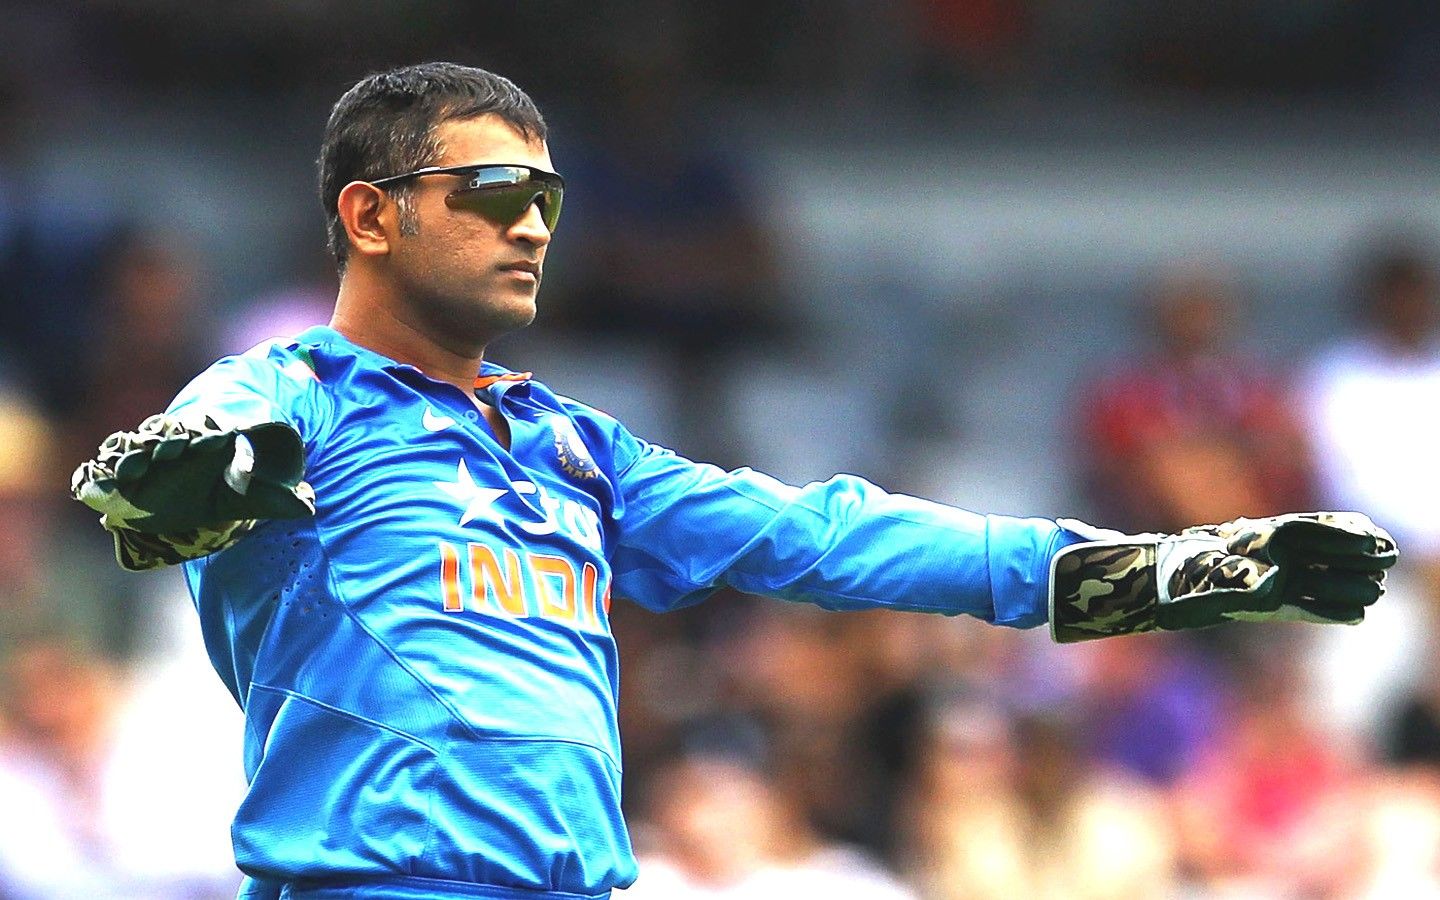 Ms dhoni pictures latest for android mobile FULLHDIMAGESS.COM